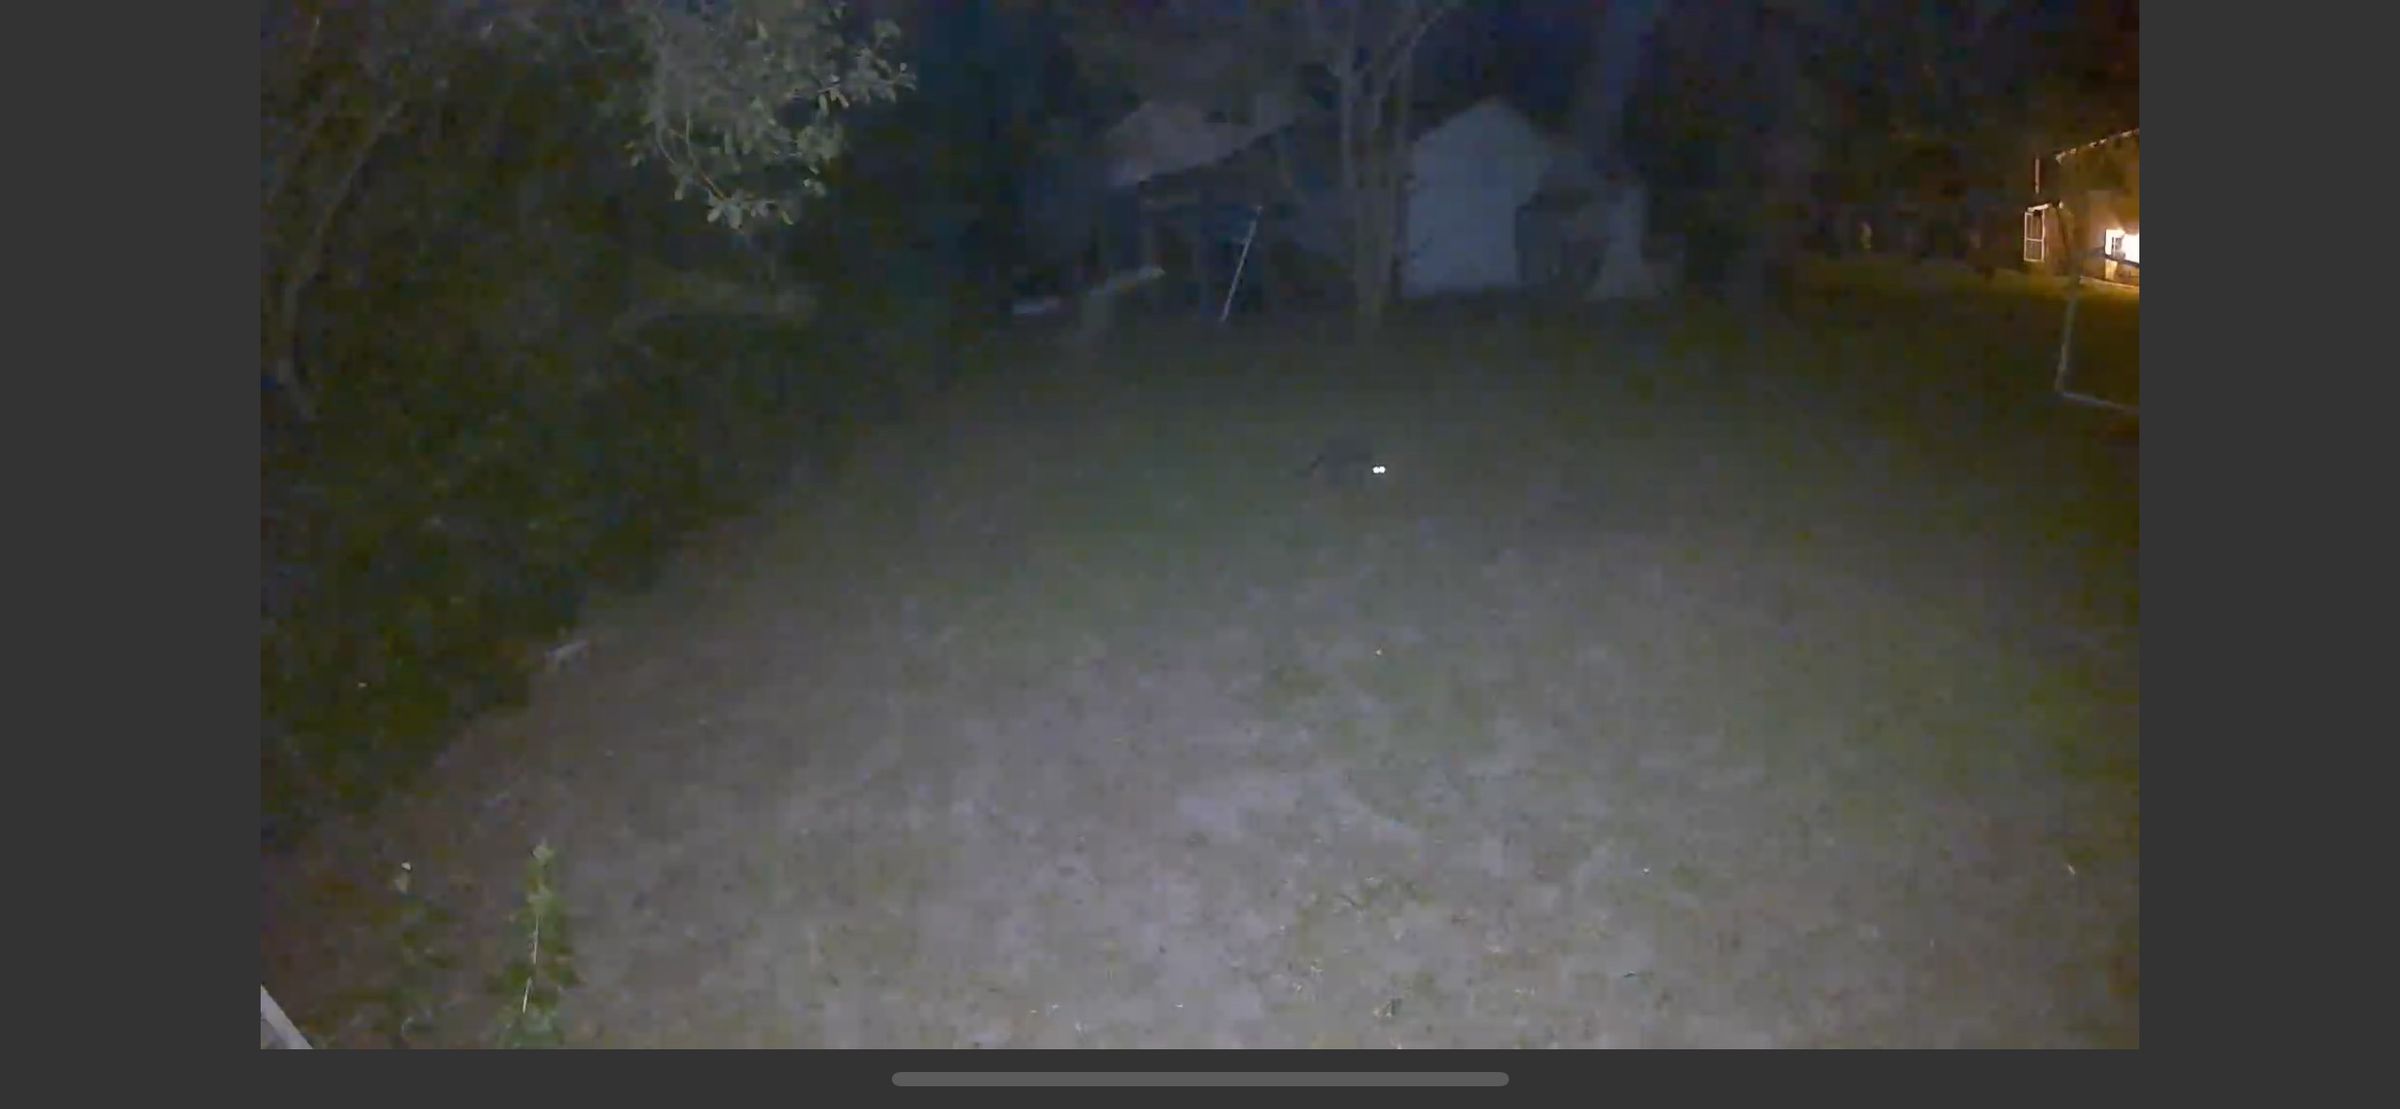 Arlo Go 2 nighttime footage with spotlight (triggered by a raccoon that you can just make out).